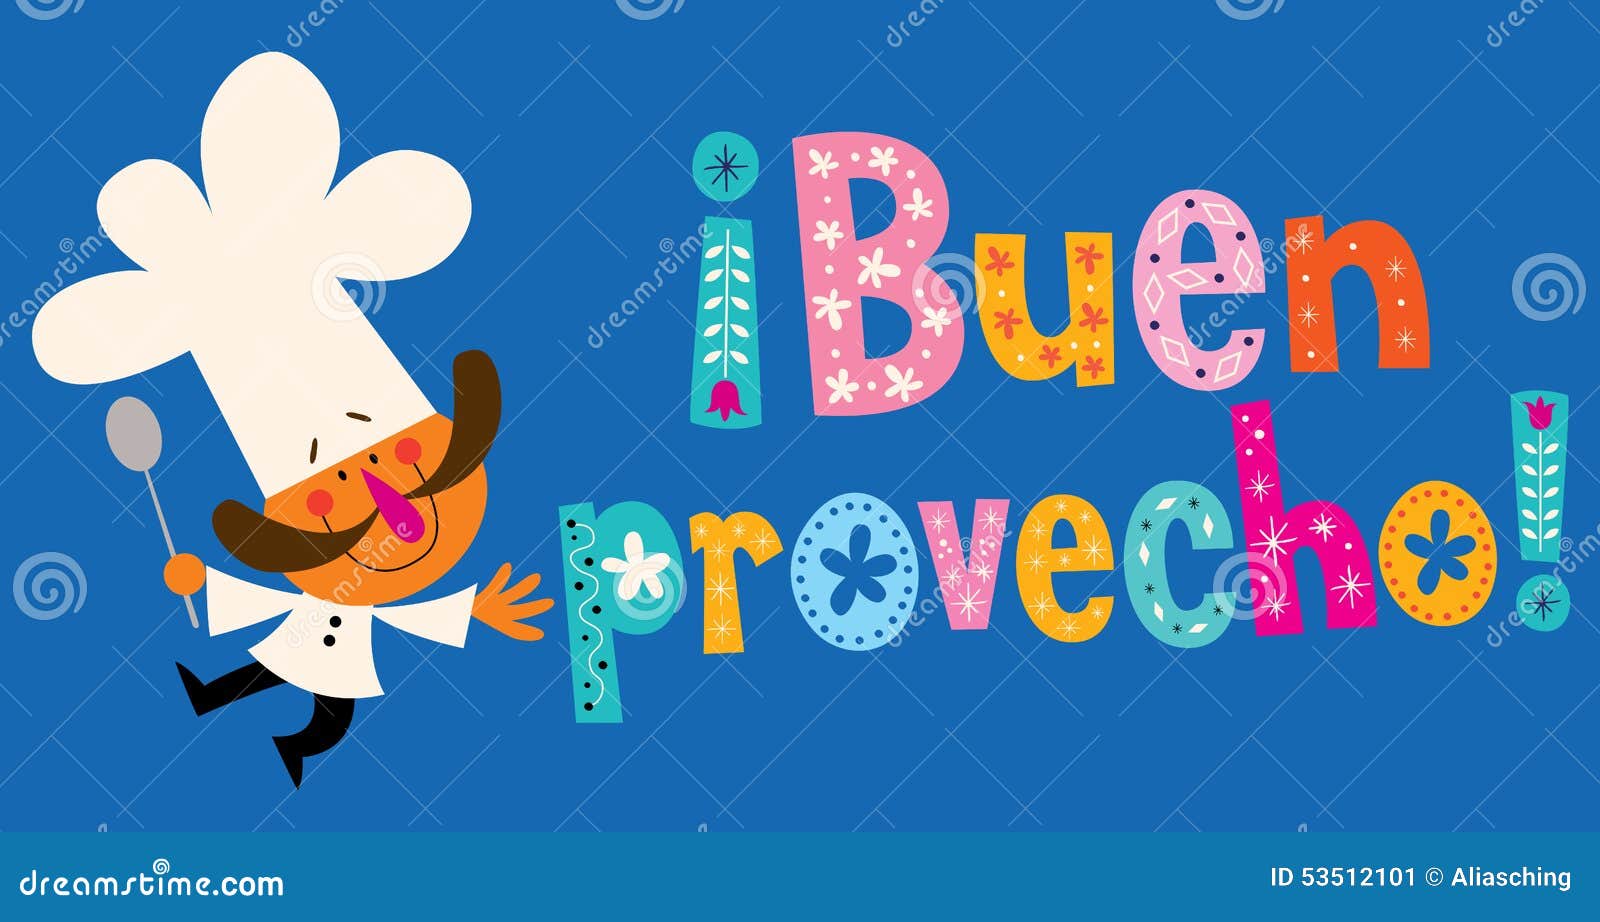 buen provecho spanish decorative lettering with chef character